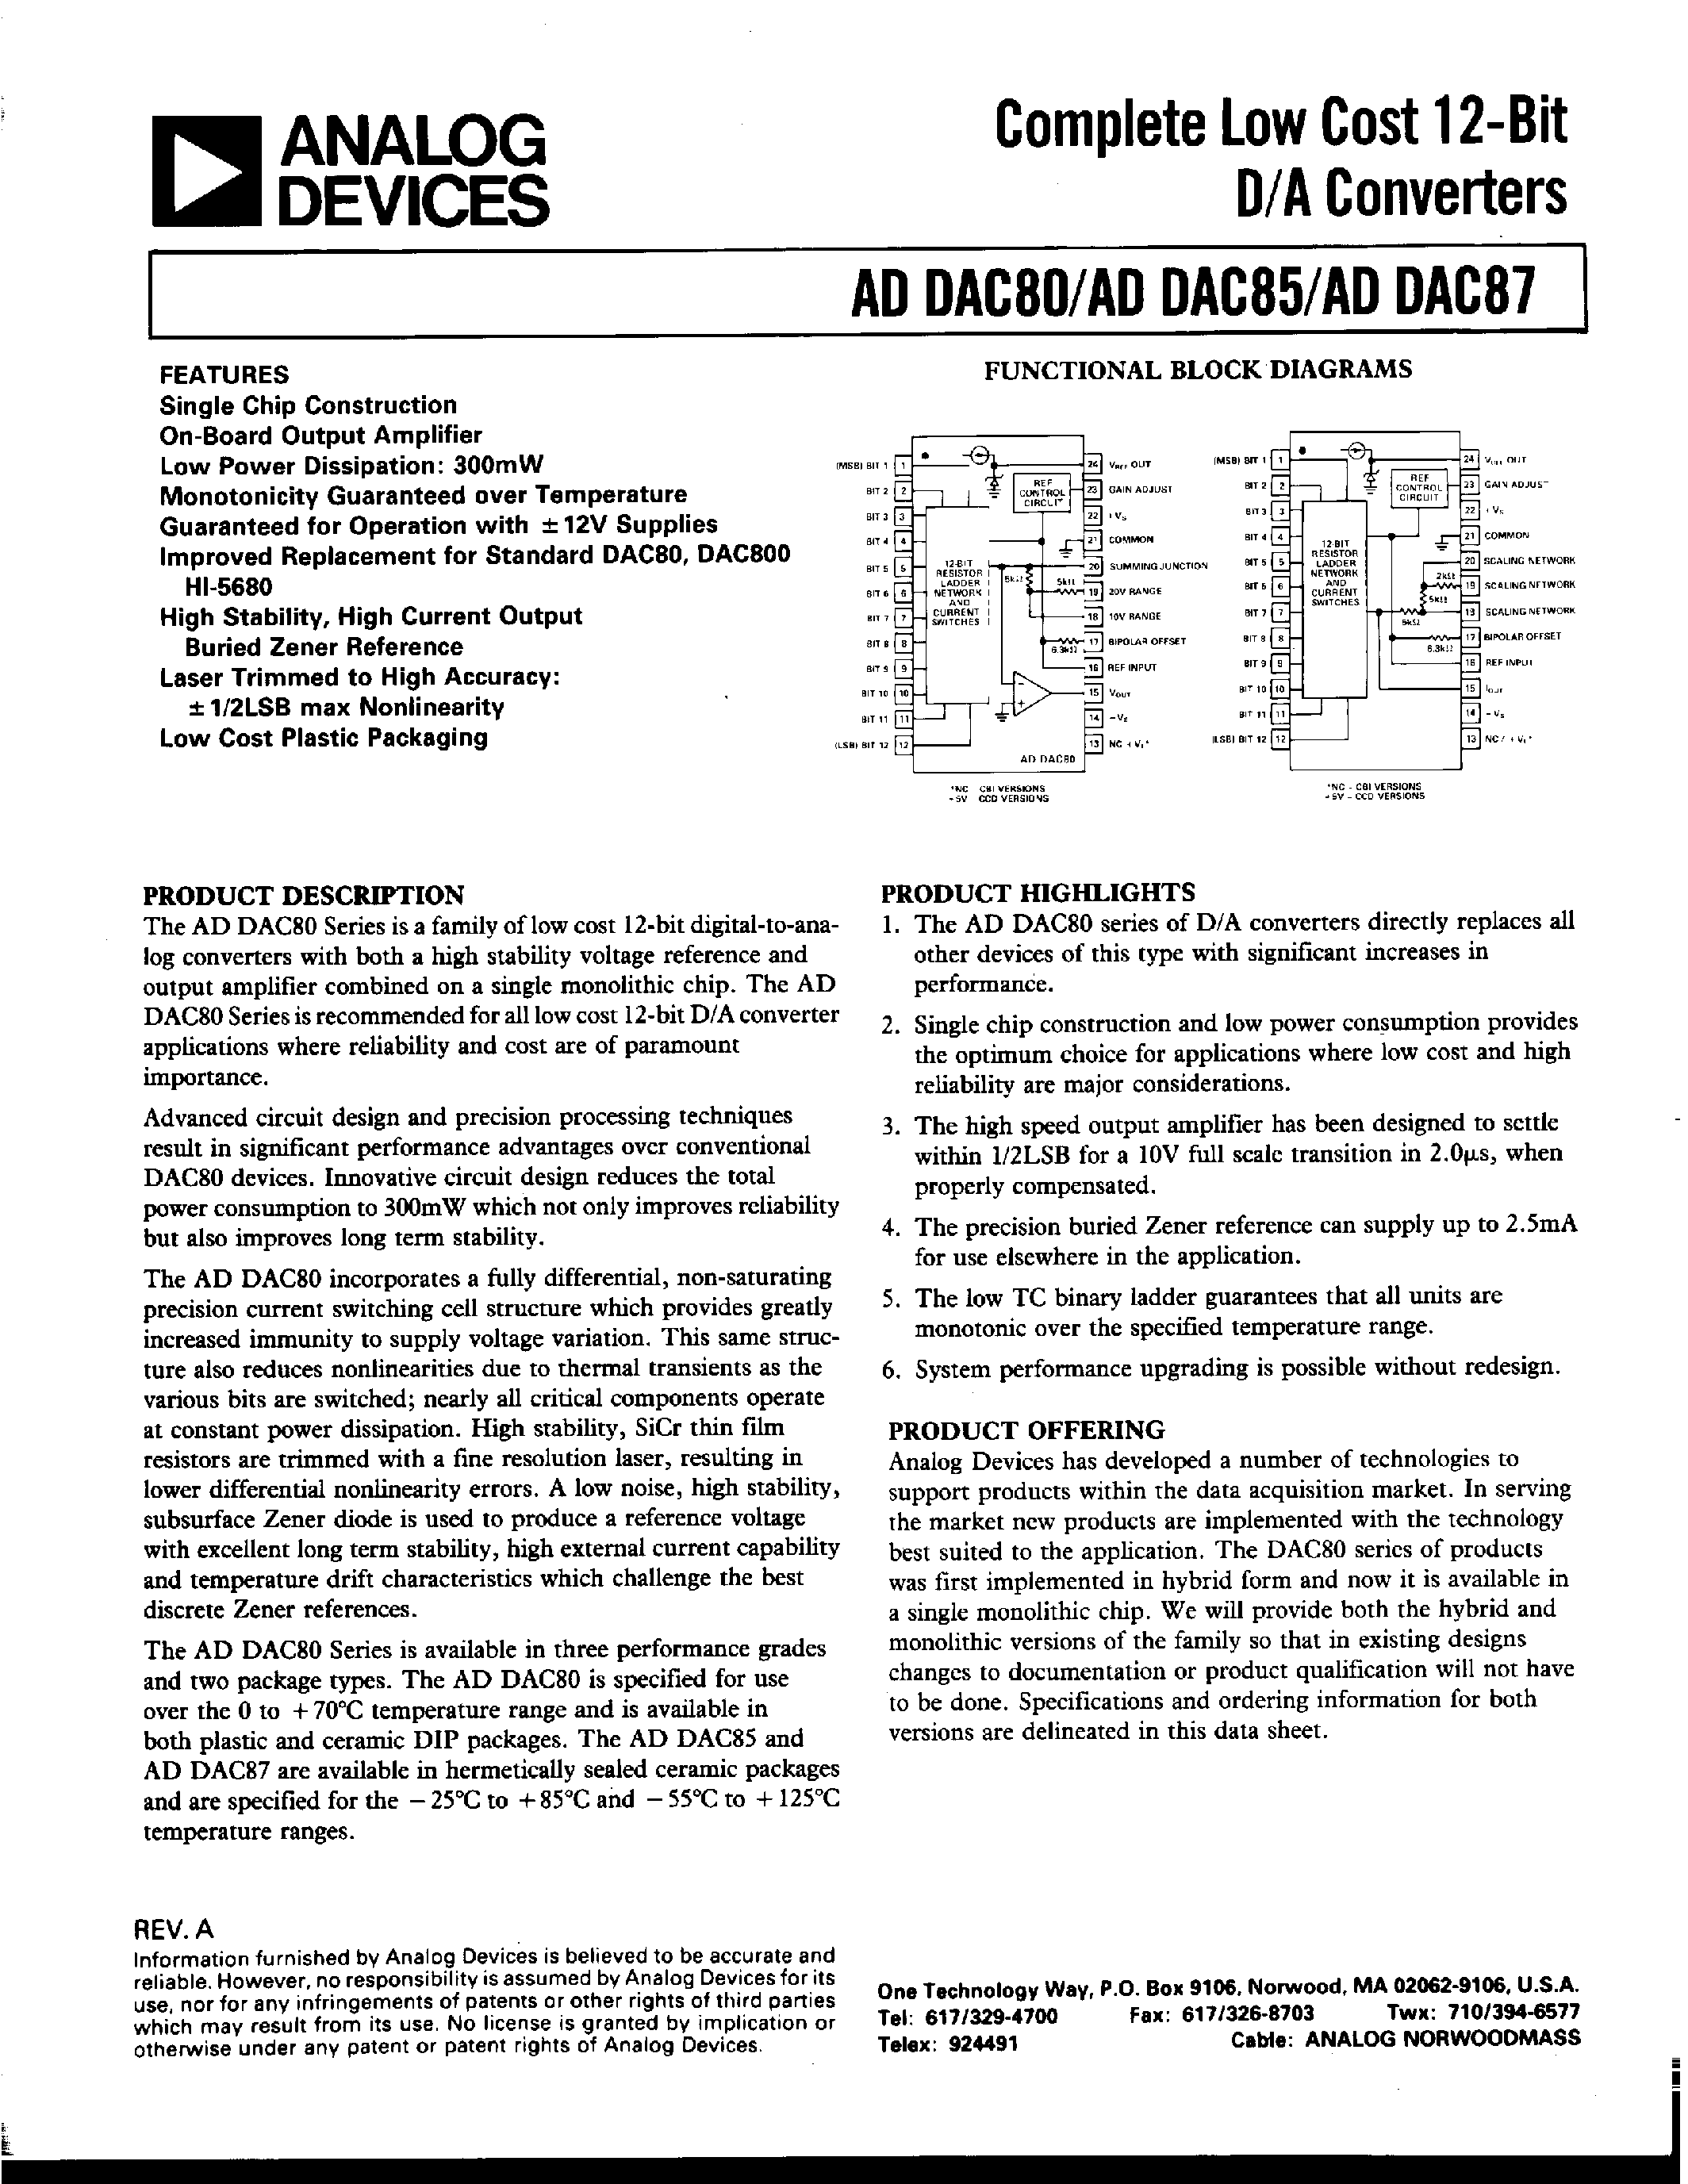 Datasheet ADDAC80Z-CBI-V - COMPLETE LOW COST 12-BIT D/A CONVERTERS page 1